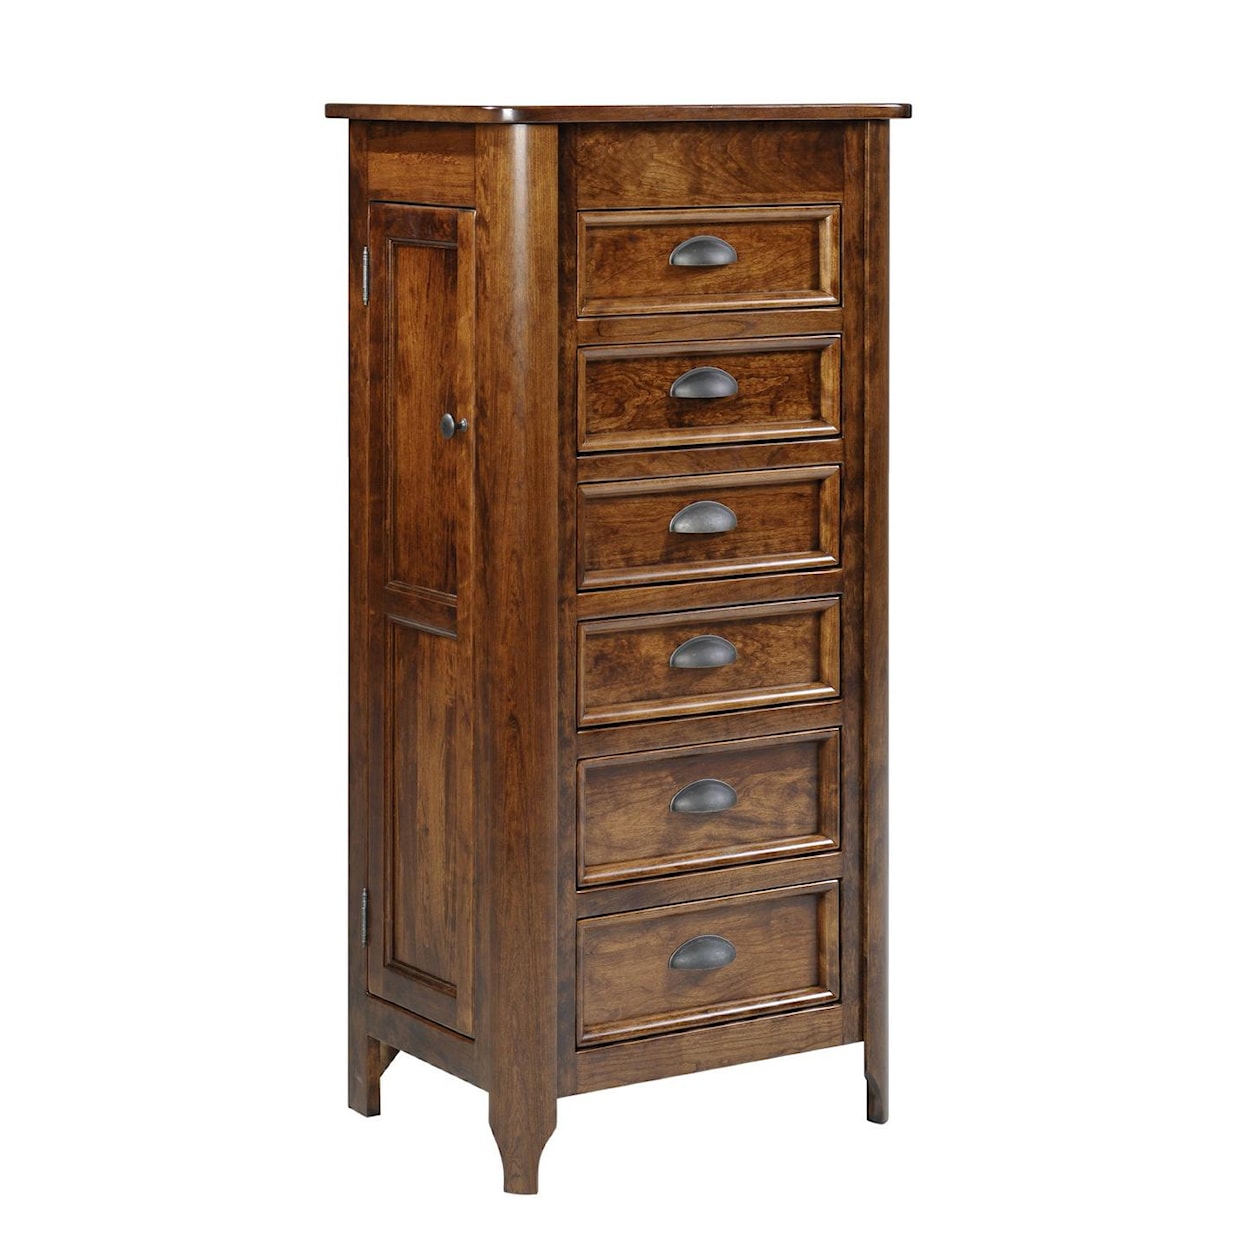 The Urban Collection Hudson  Jewelry Armoire